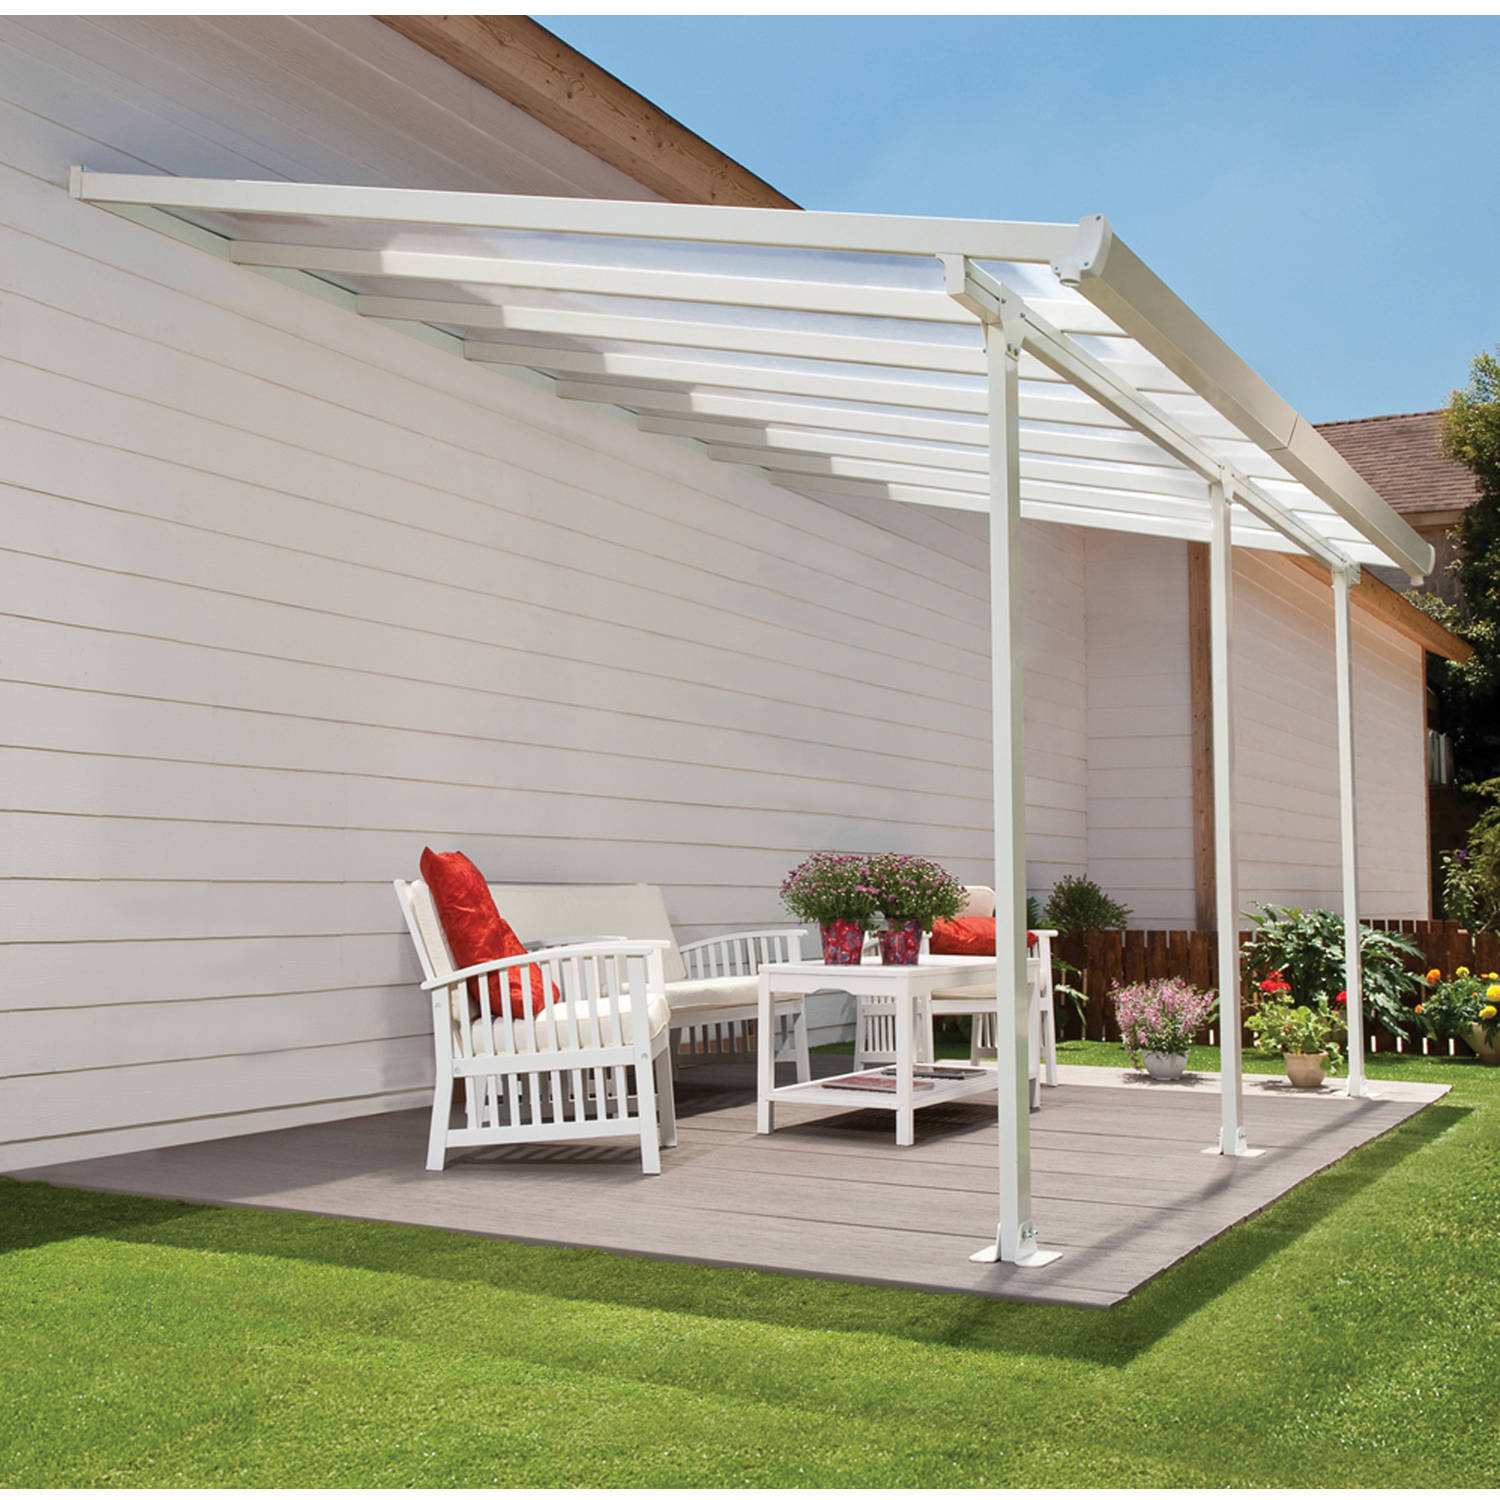 Palram Feria 26 X 13 Patio Cover White Walmart intended for measurements 1500 X 1500